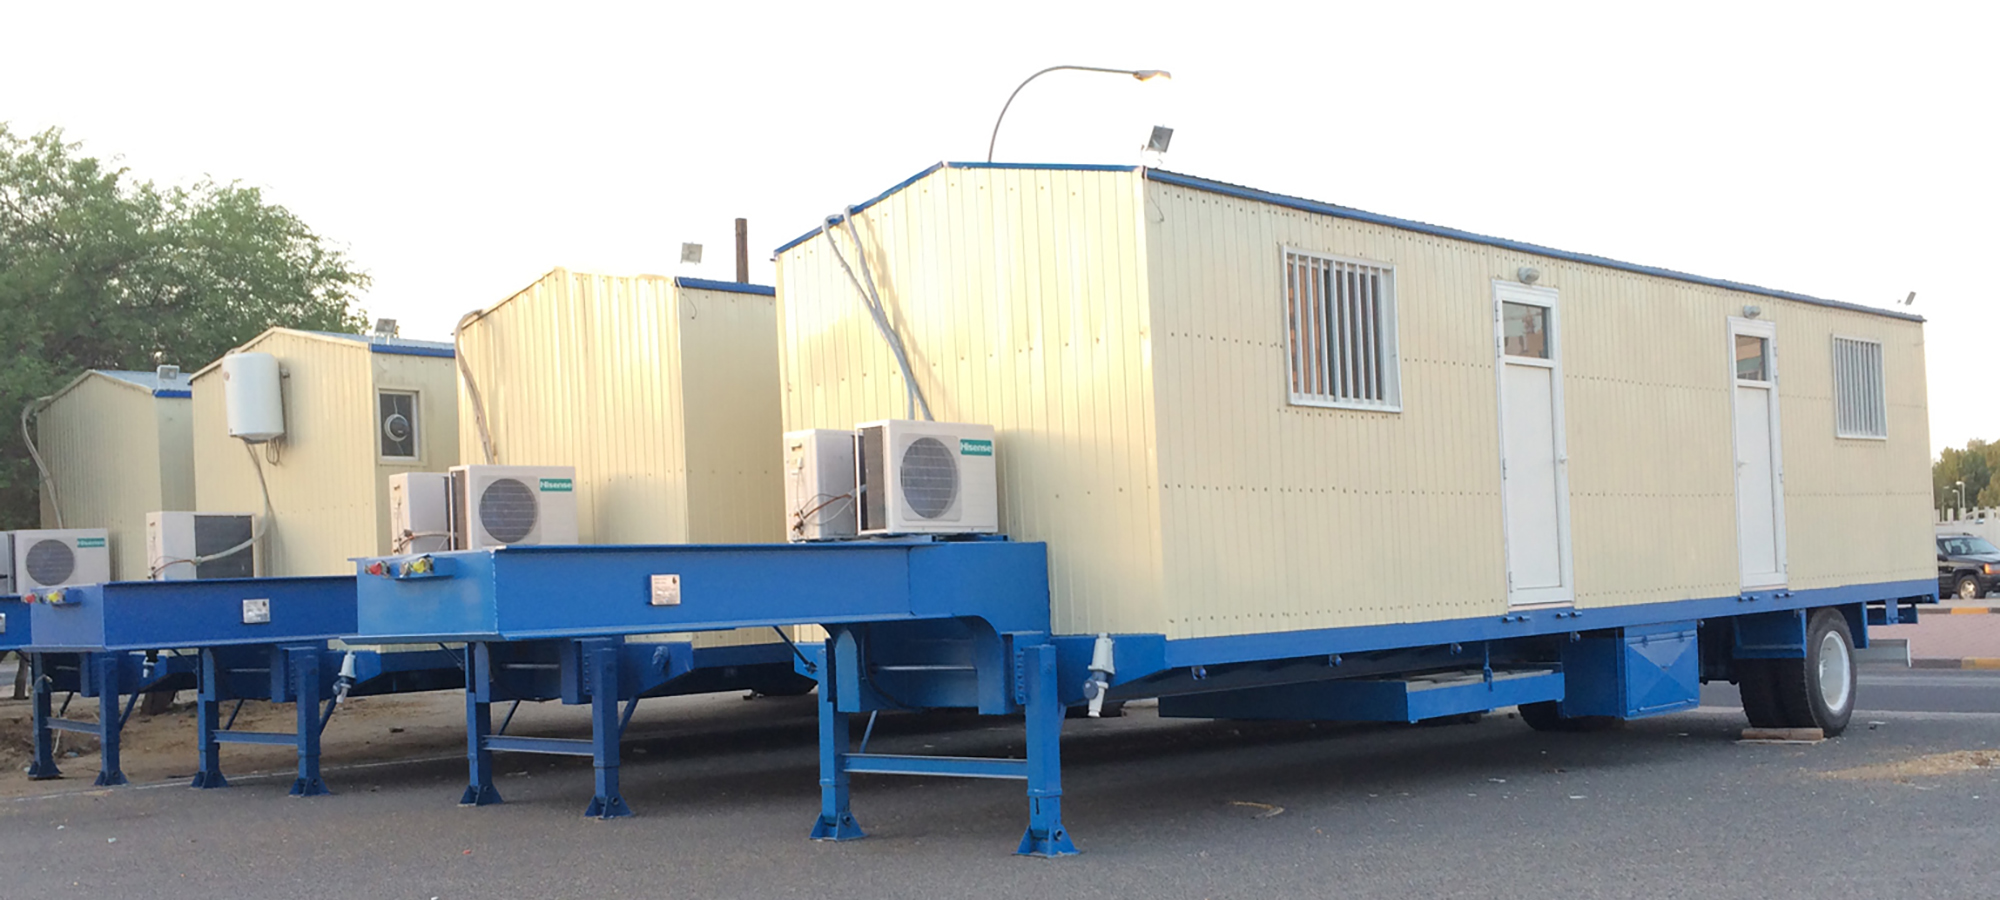 Heavy duty office trailers made in Kuwait with-high standards manufacture from sandwich panels